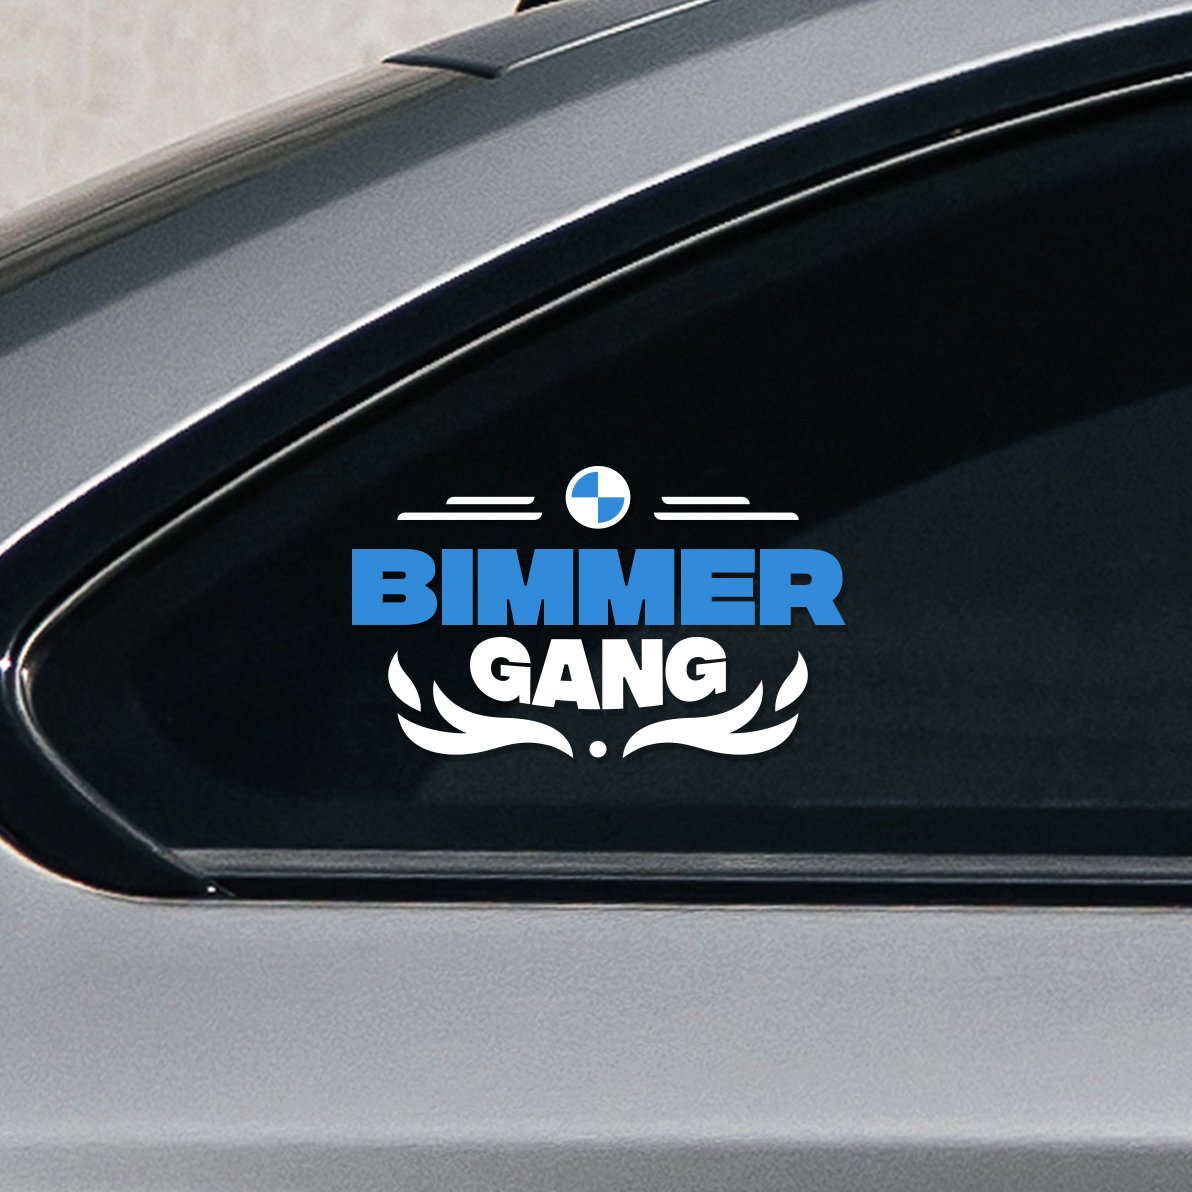 Dope Bimmer Gang contour cut sticker. Made of premium white and blue ORACAL vinyls. Sticker has a bmw logo, lettering and some flames.